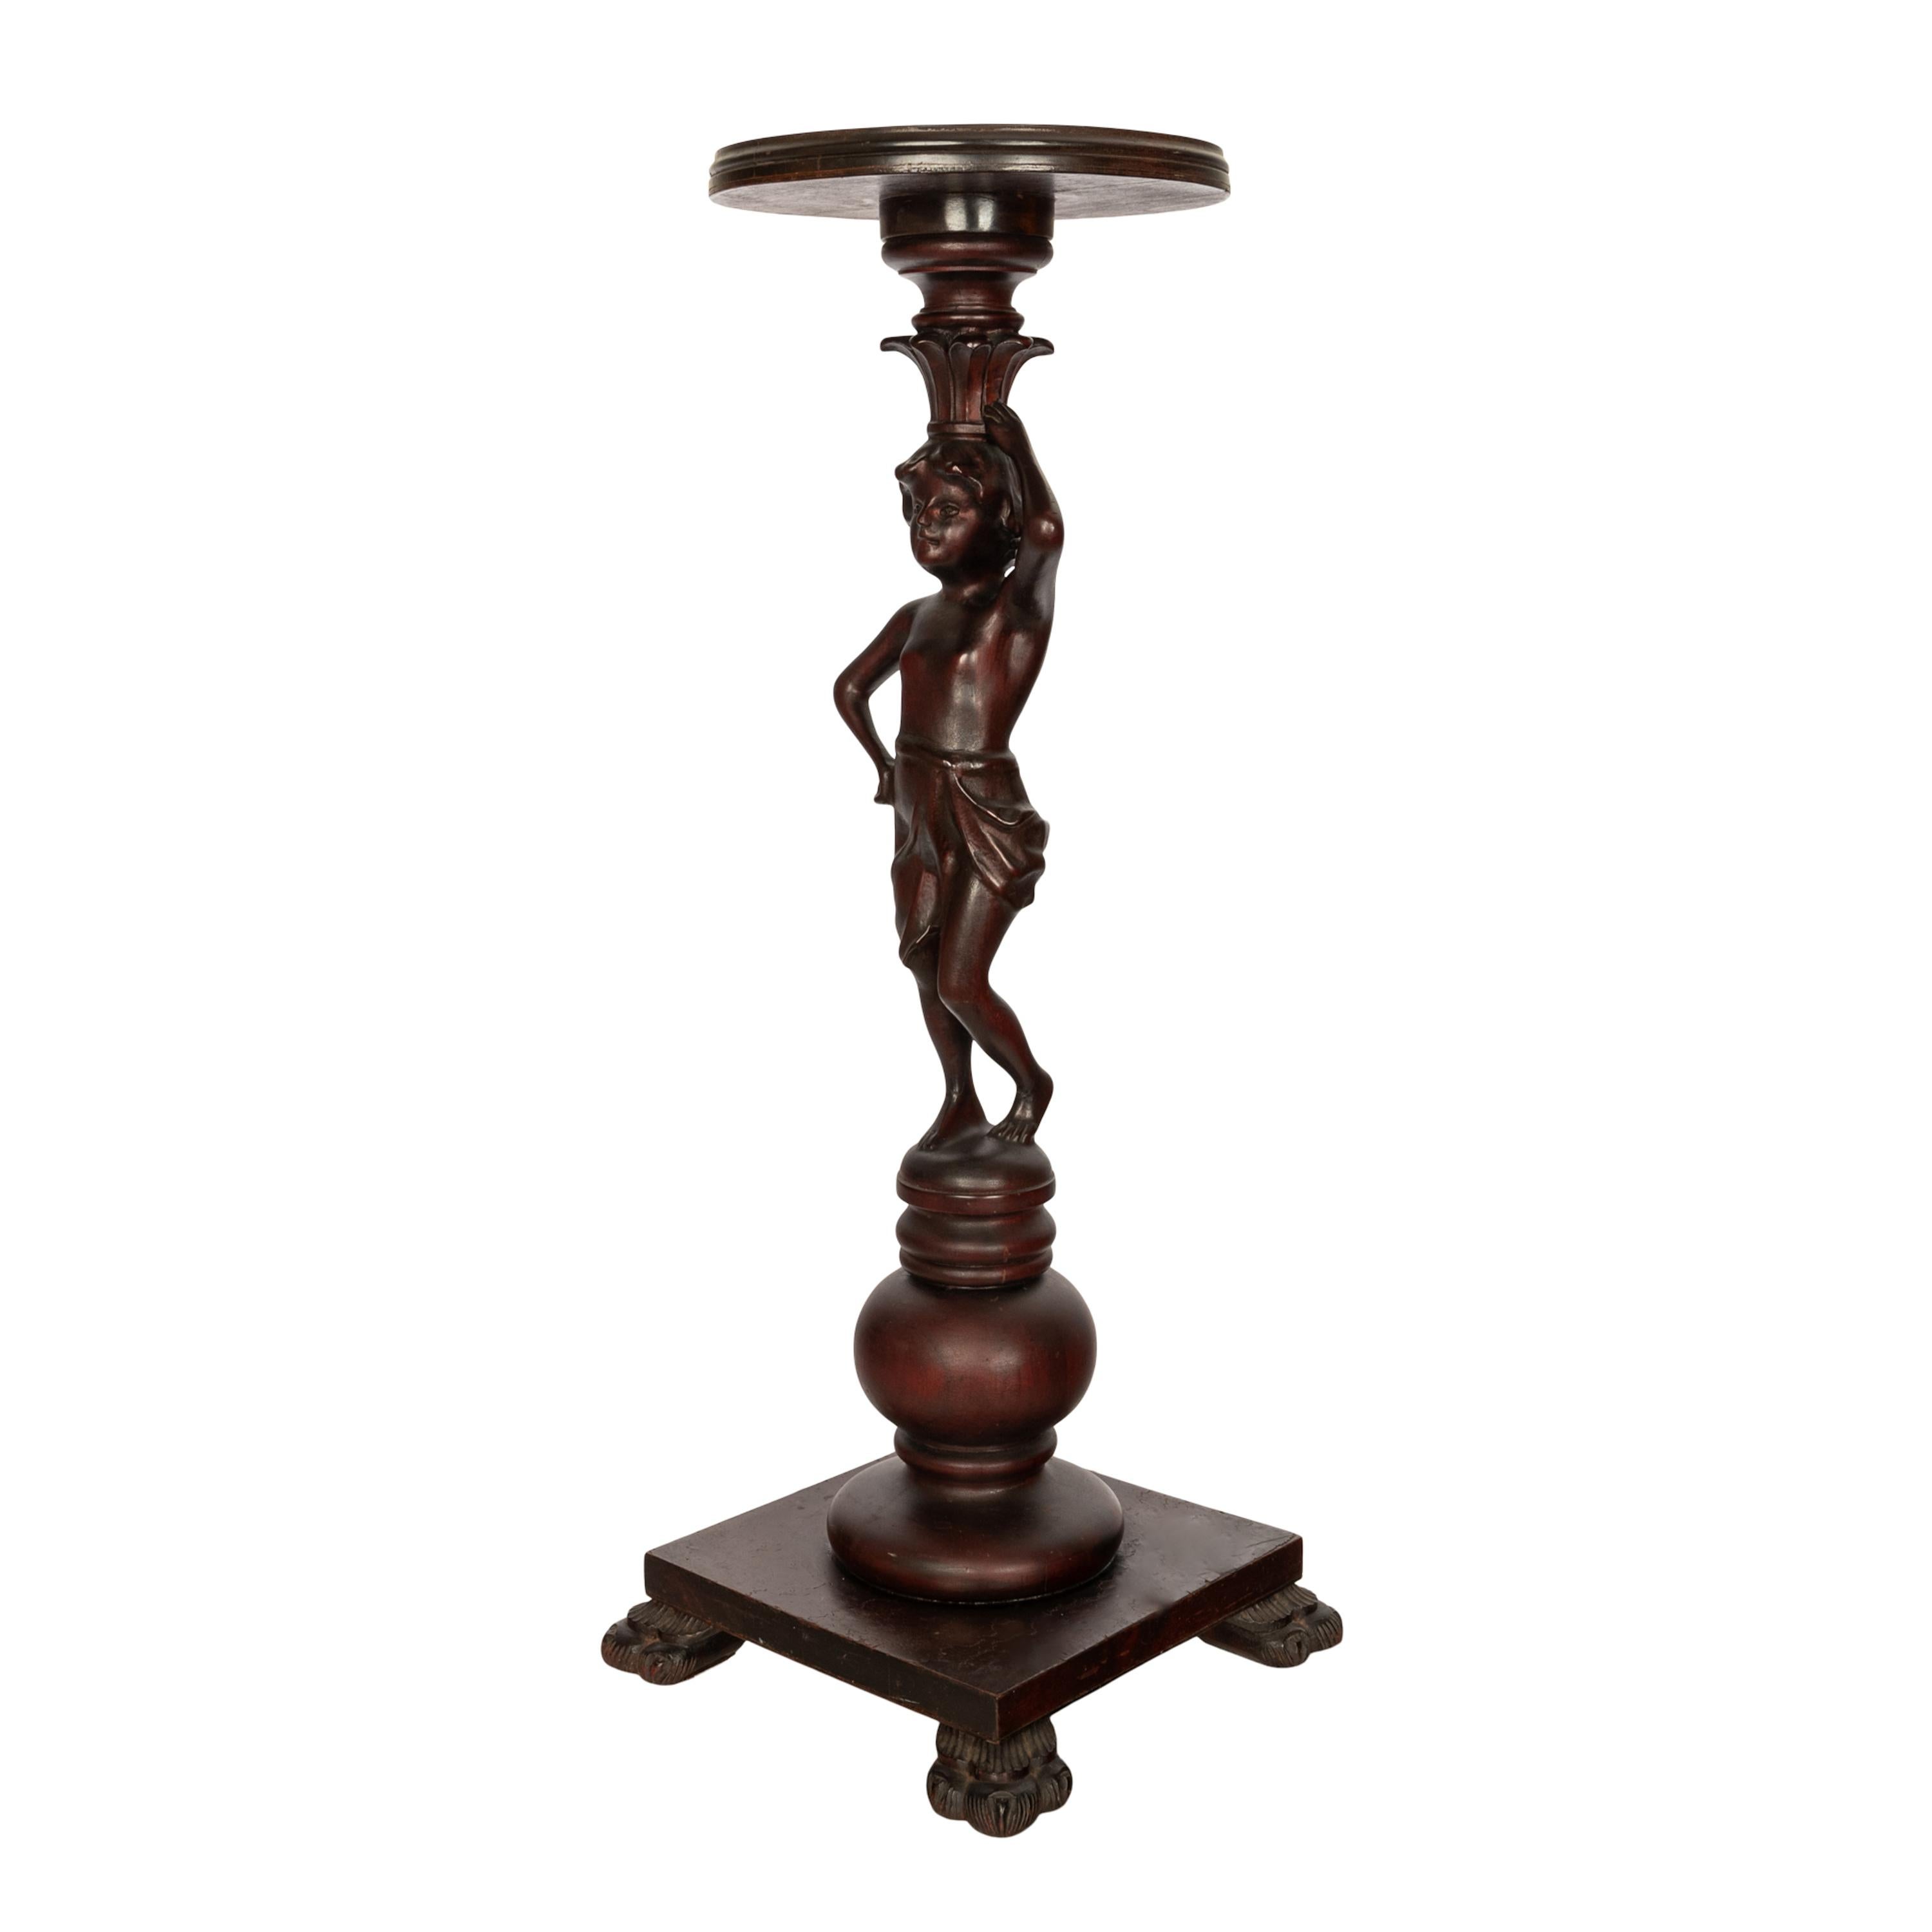 A good antique carved Italian walnut figural pedestal candle/wine stand, side table, Circa 1900.
The table is very well carved with a circular table top, the pedestal support is carved with a Moorish standing figure raised on circular carved